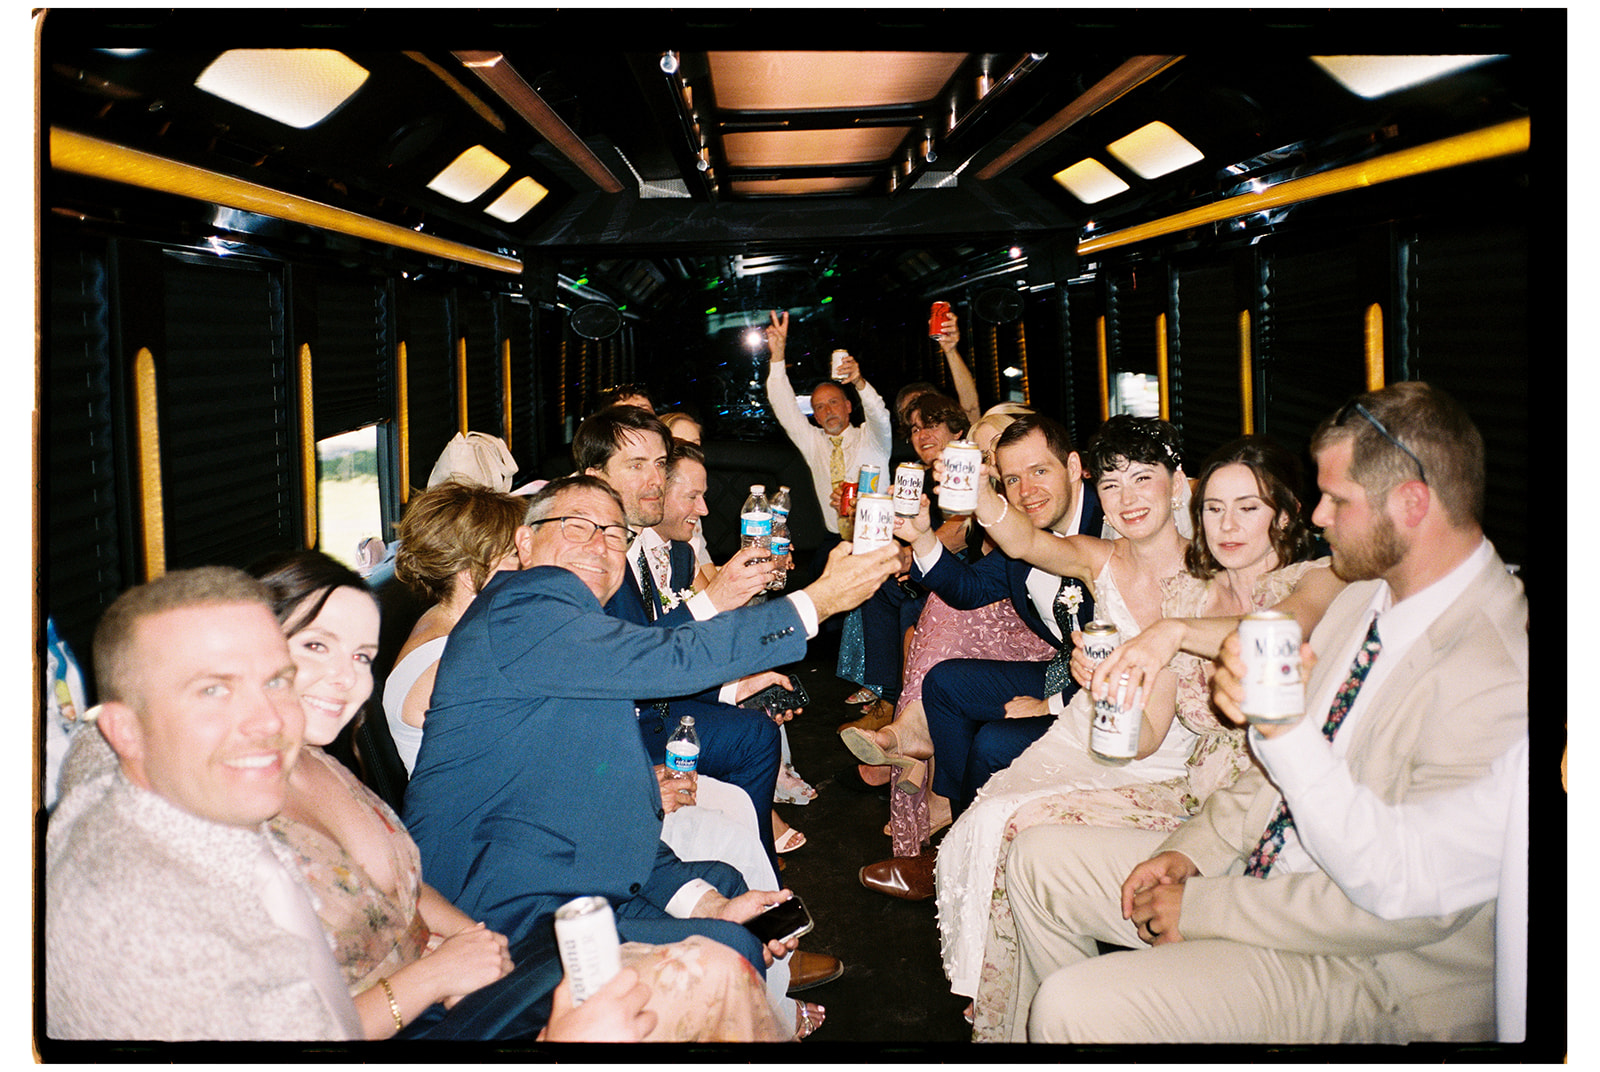 A group of people dressed in formal attire are sitting inside a bus, raising drinks and smiling at the camera on their way to a garden party wedding